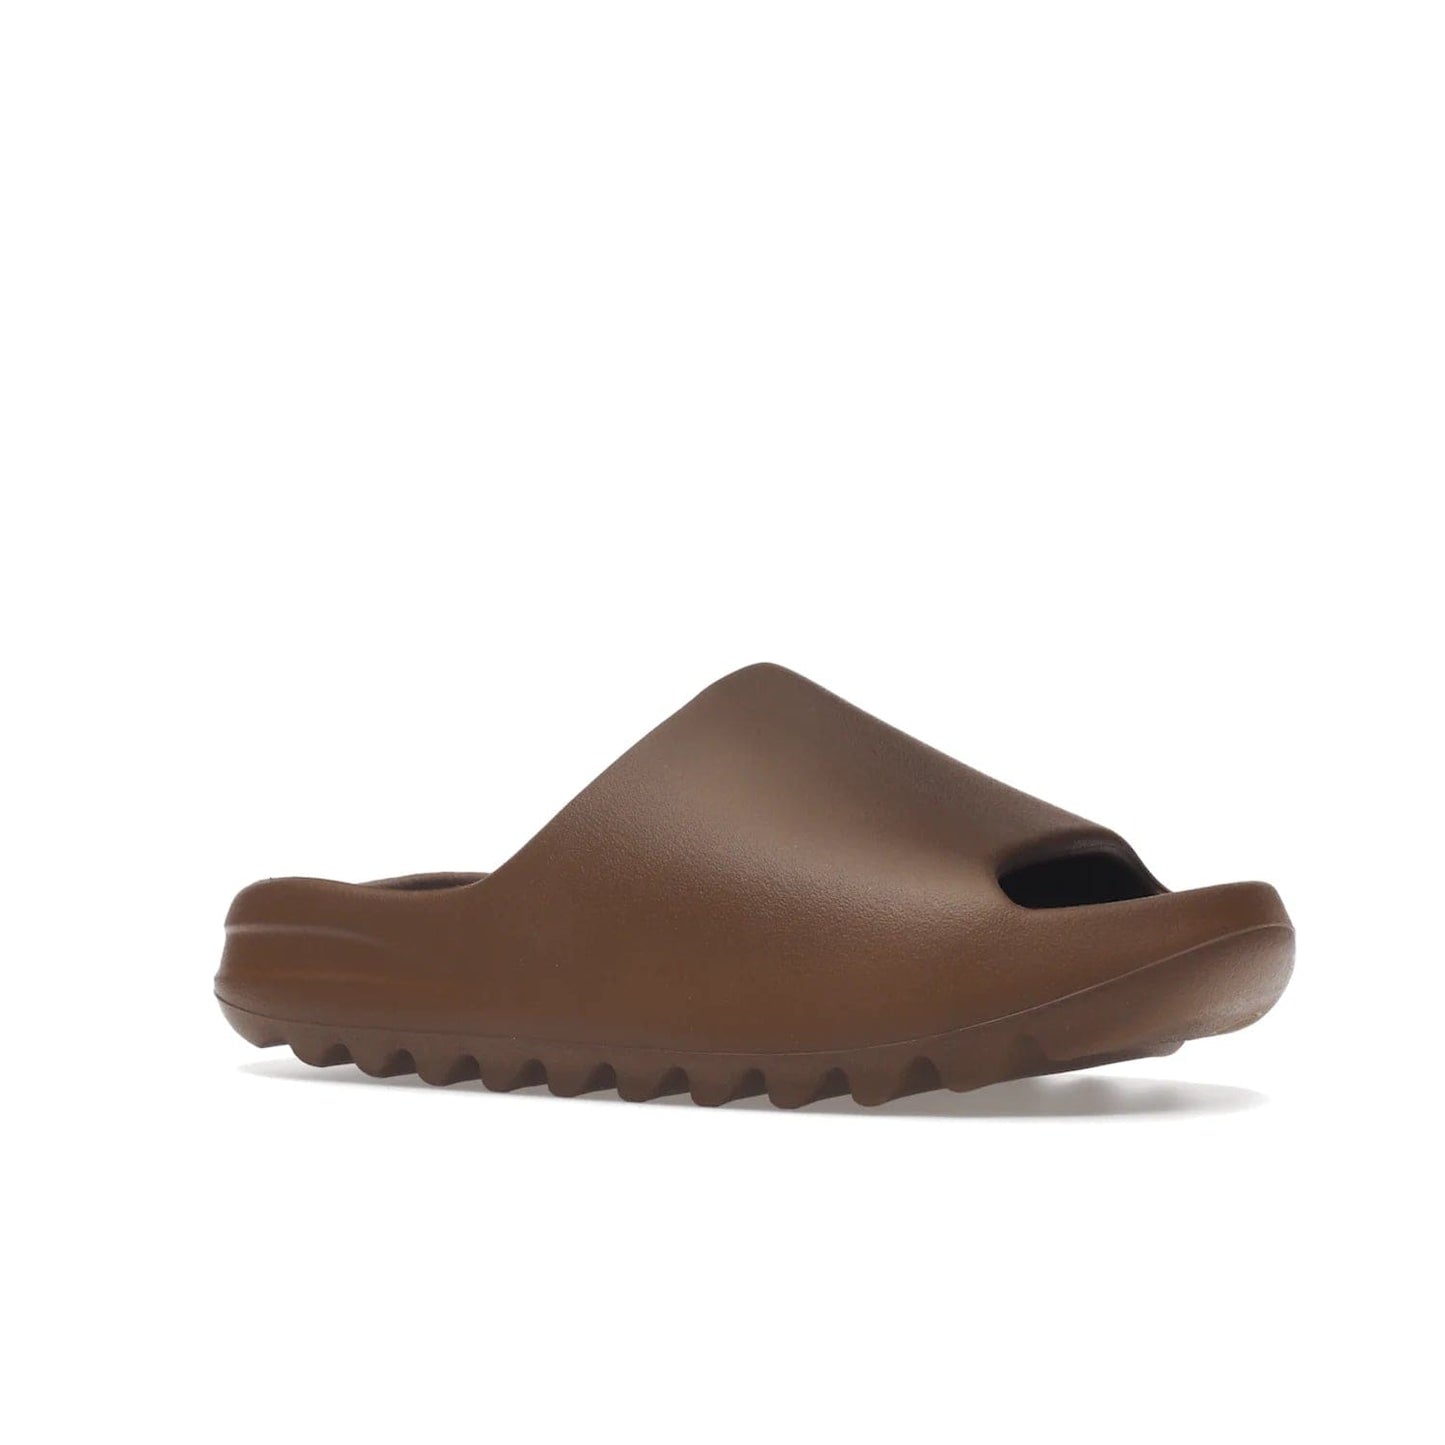 adidas Yeezy Slide Flax - Image 4 - Only at www.BallersClubKickz.com - Score the perfect casual look with the adidas Yeezy Slide Flax. Made with lightweight injected EVA plus horizontal grooves underfoot for traction. Release on August 22, 2022. $70.